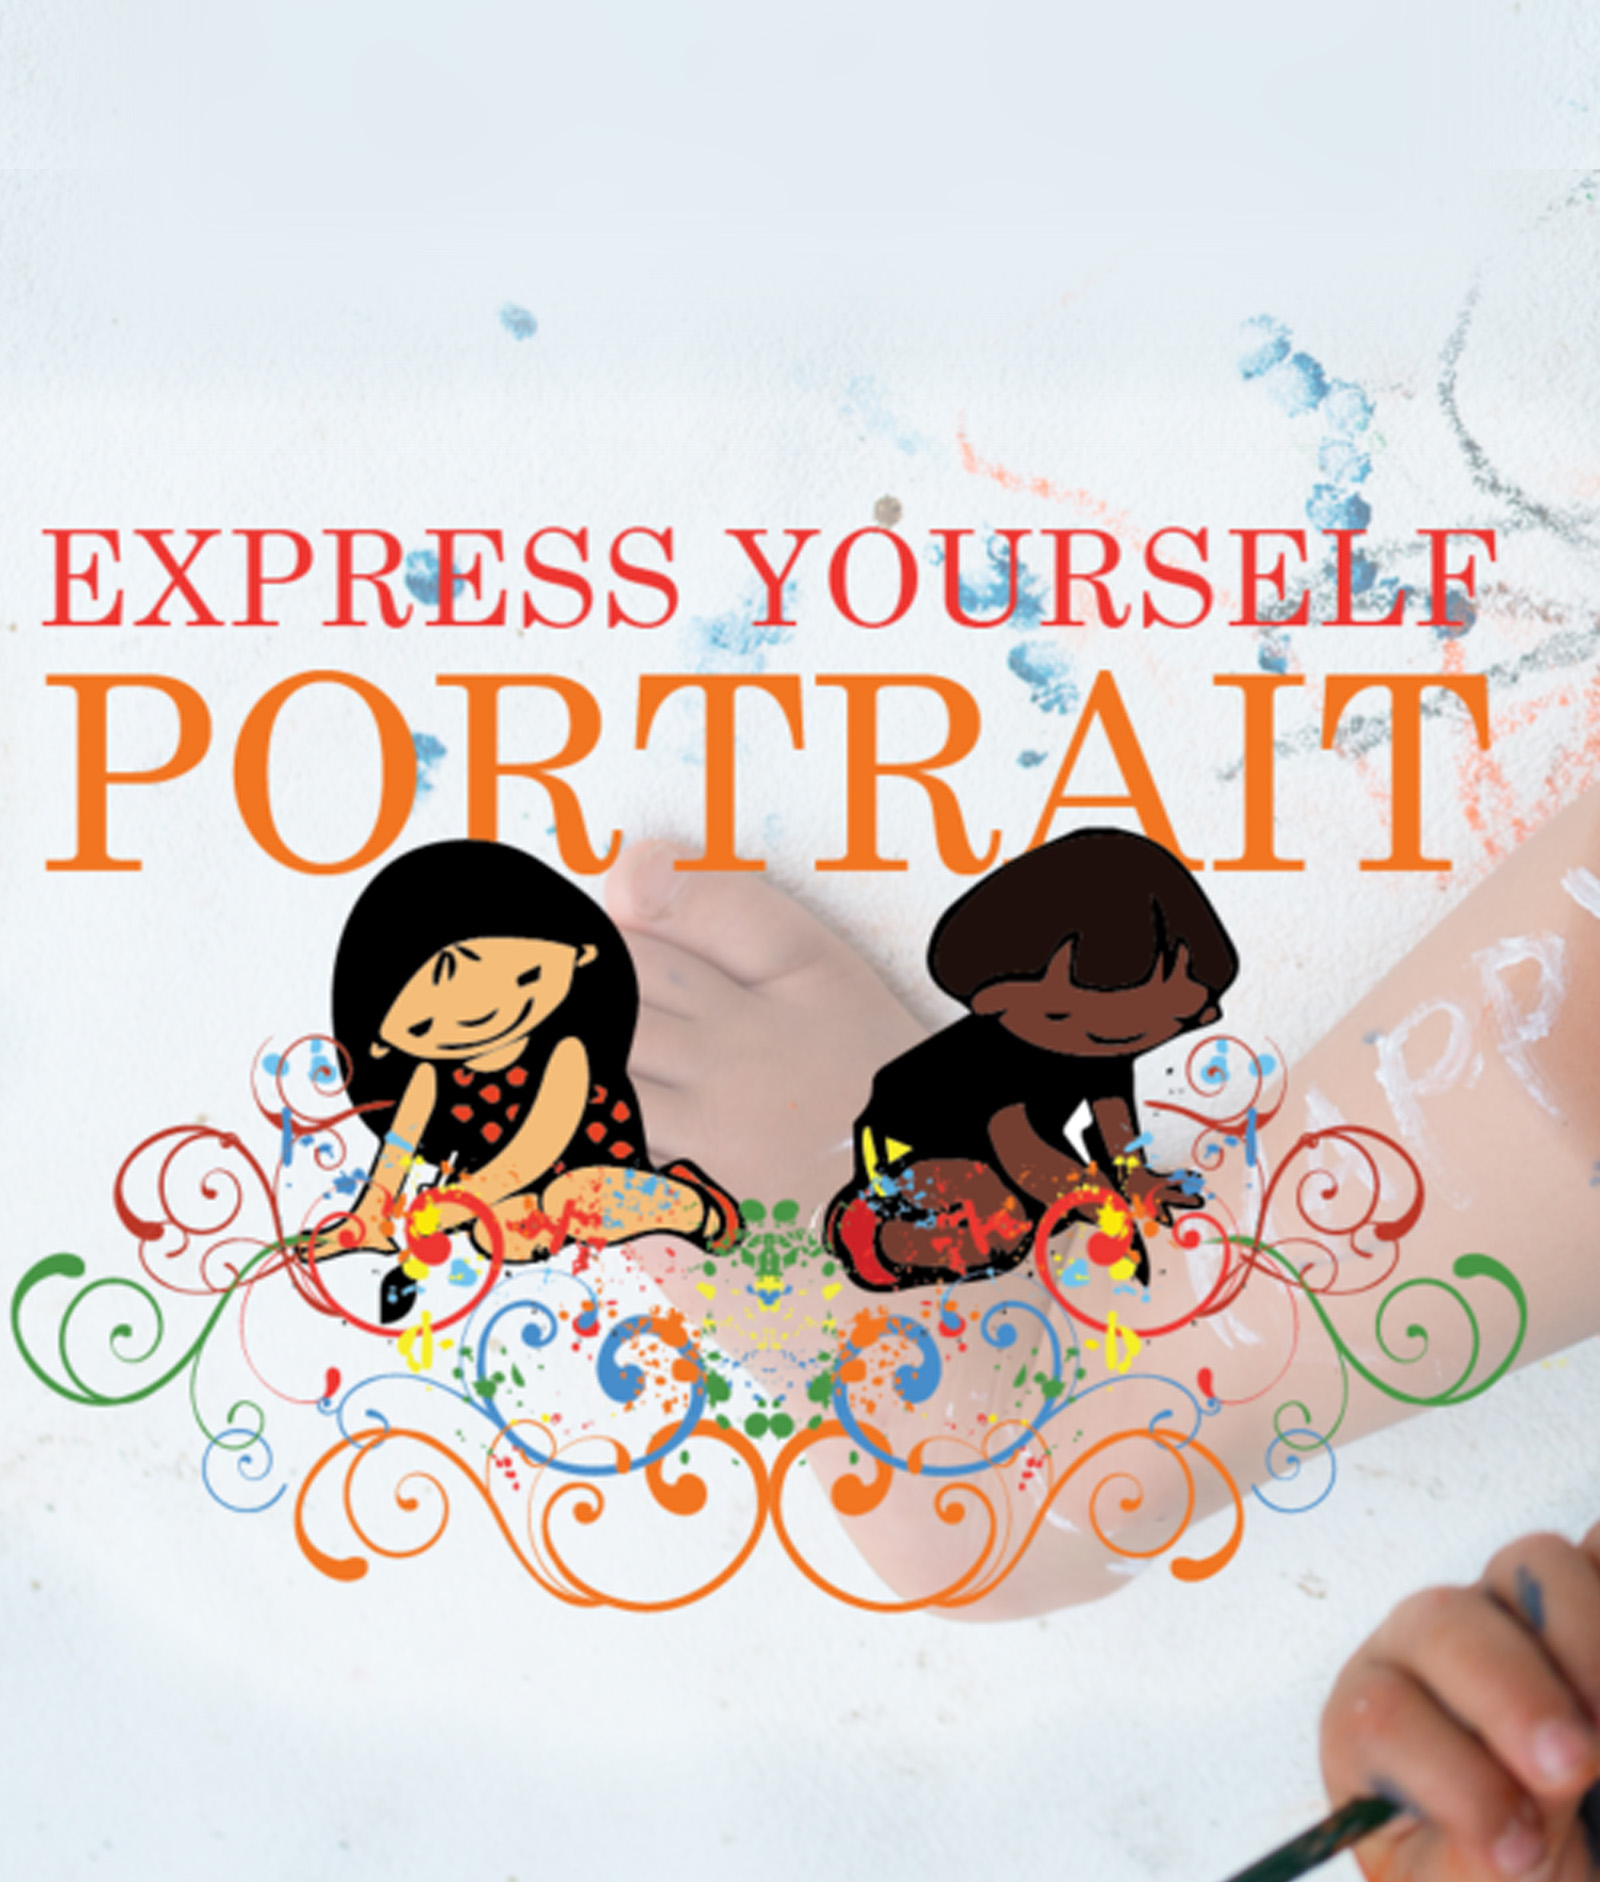 Express Yourself Portrait